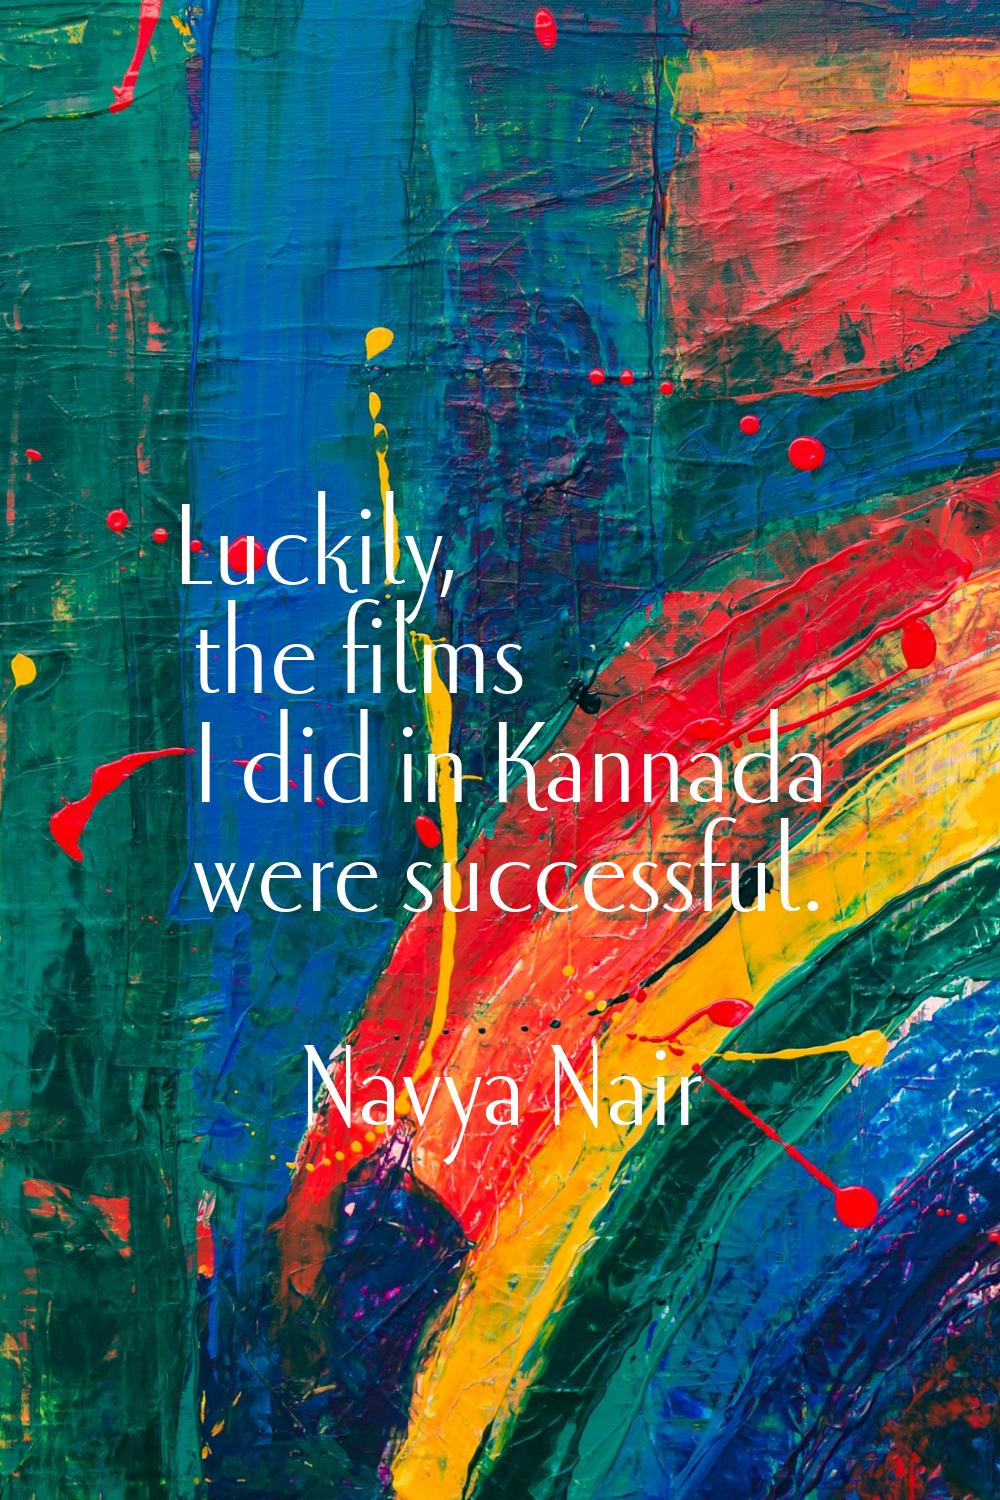 Luckily, the films I did in Kannada were successful.